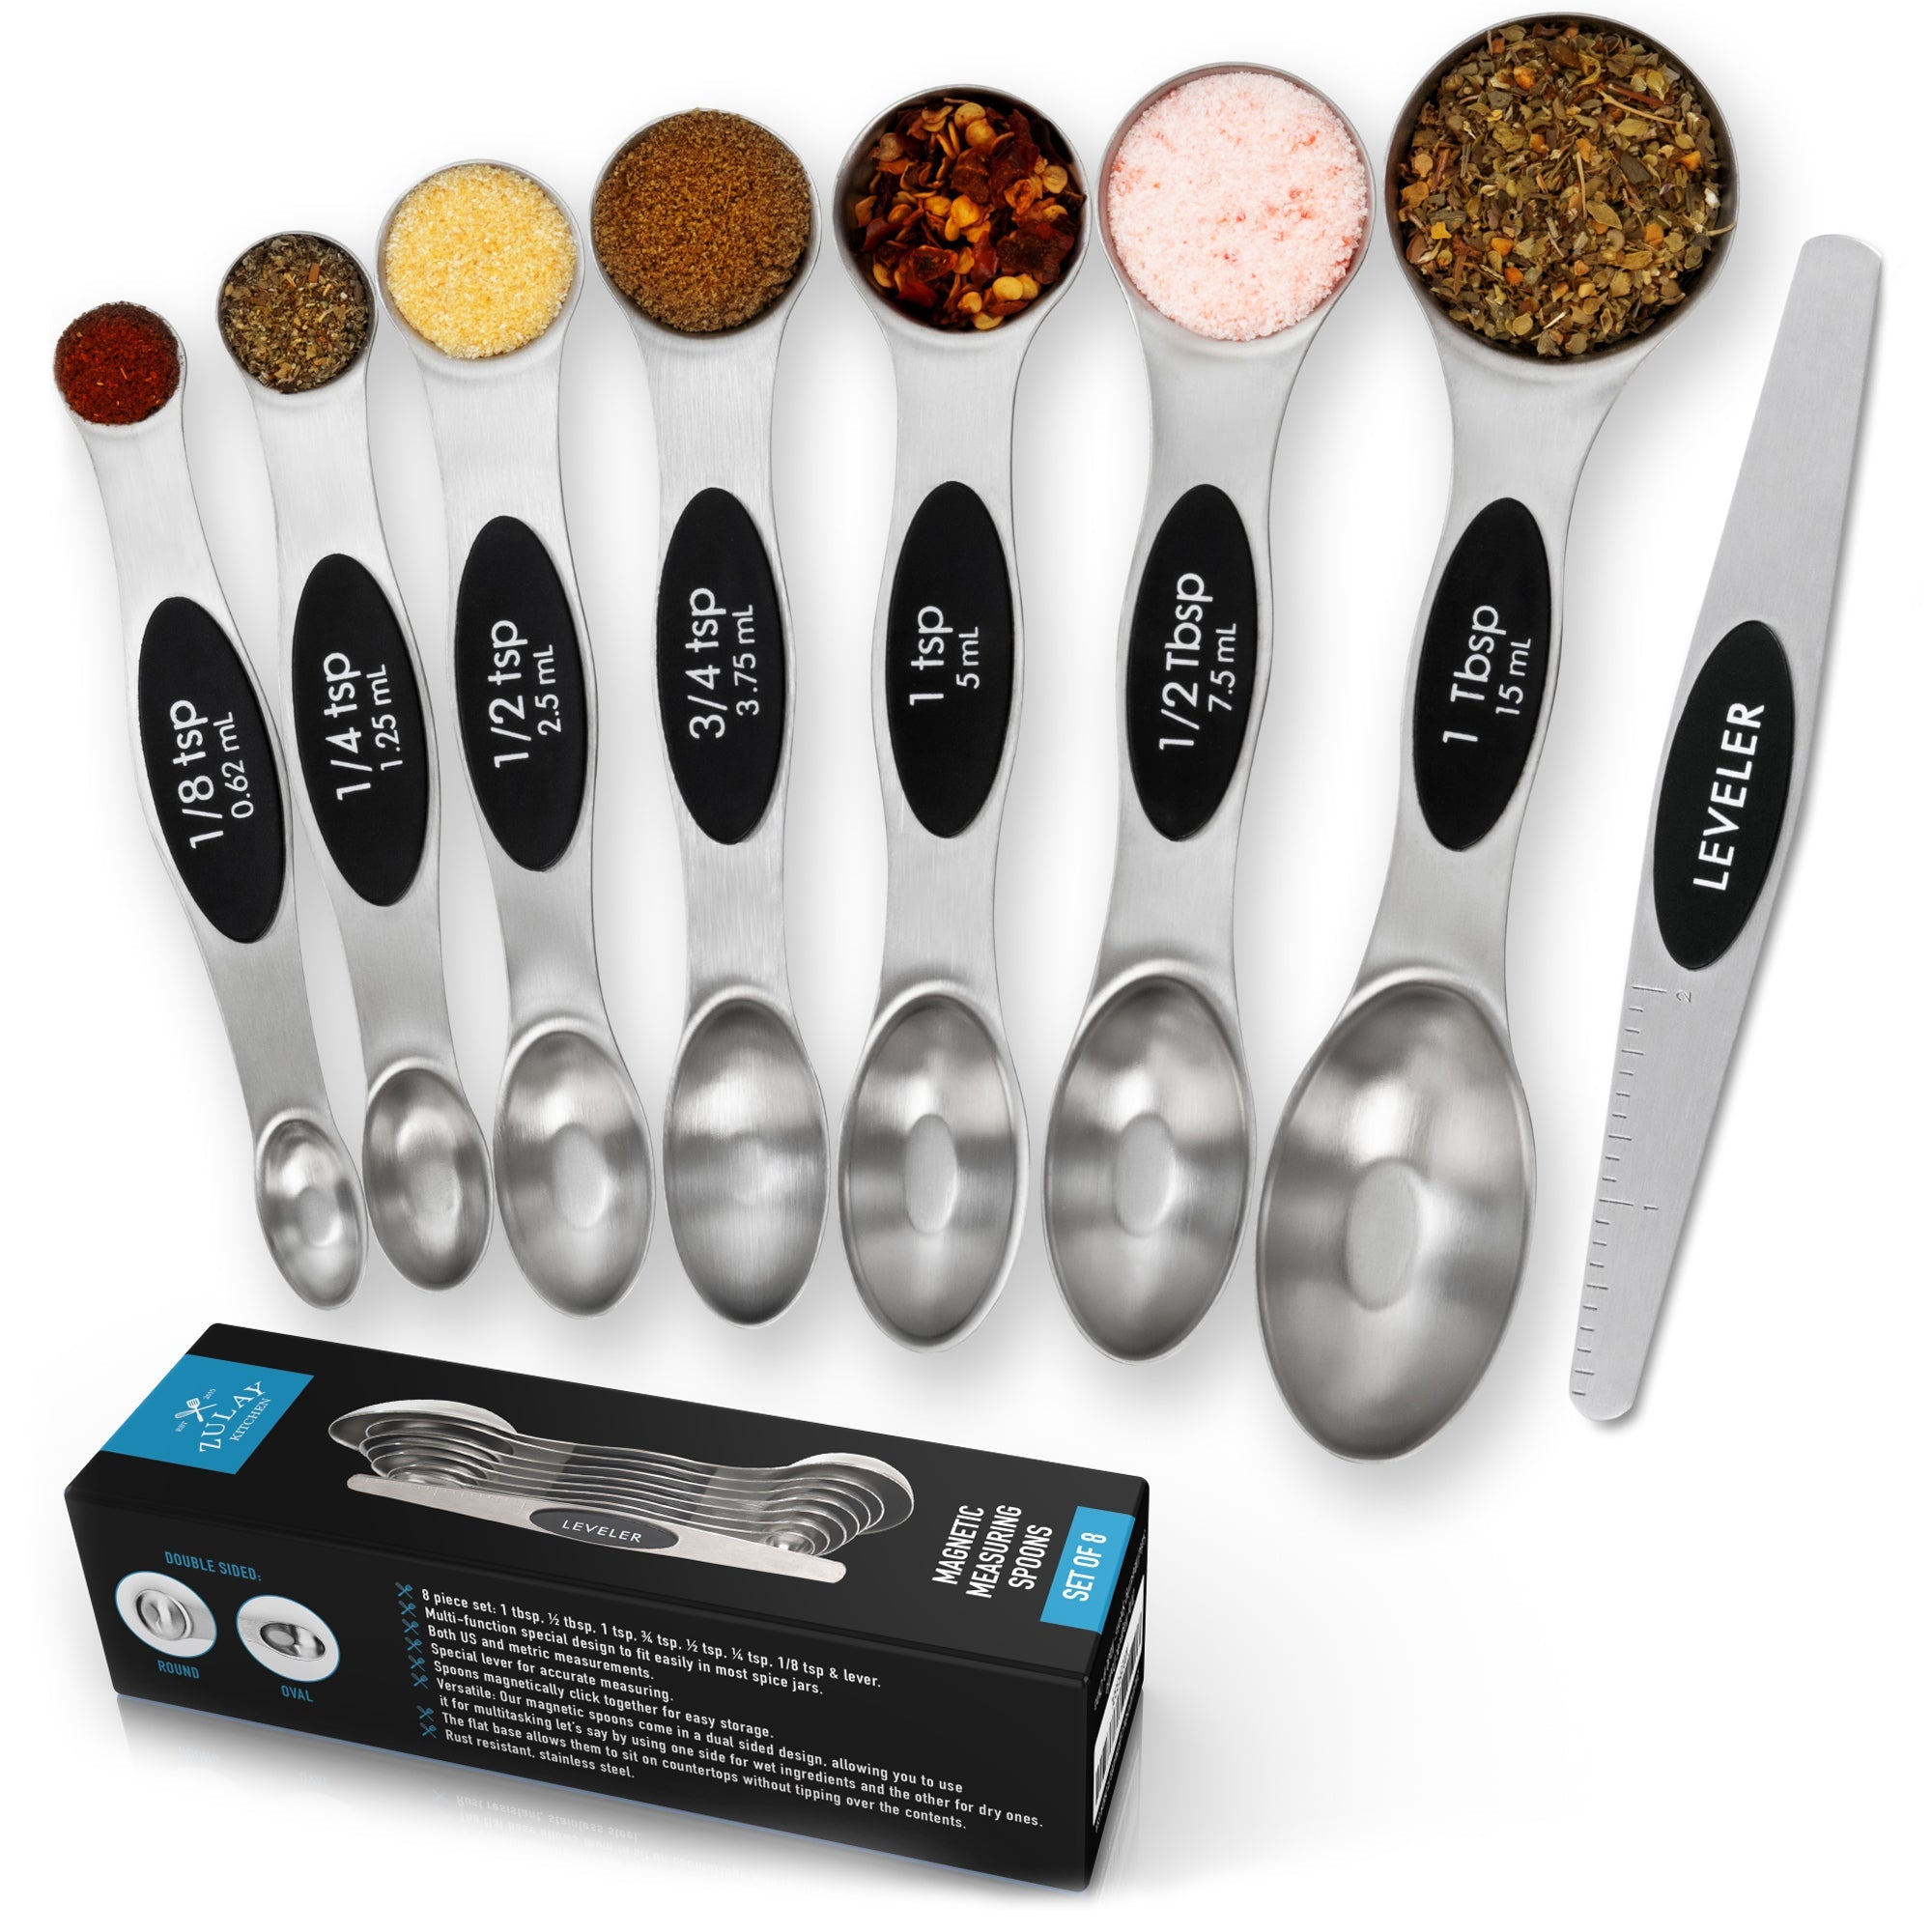 Zulay Kitchen Magnetic Measuring Spoons with Leveler - Silver